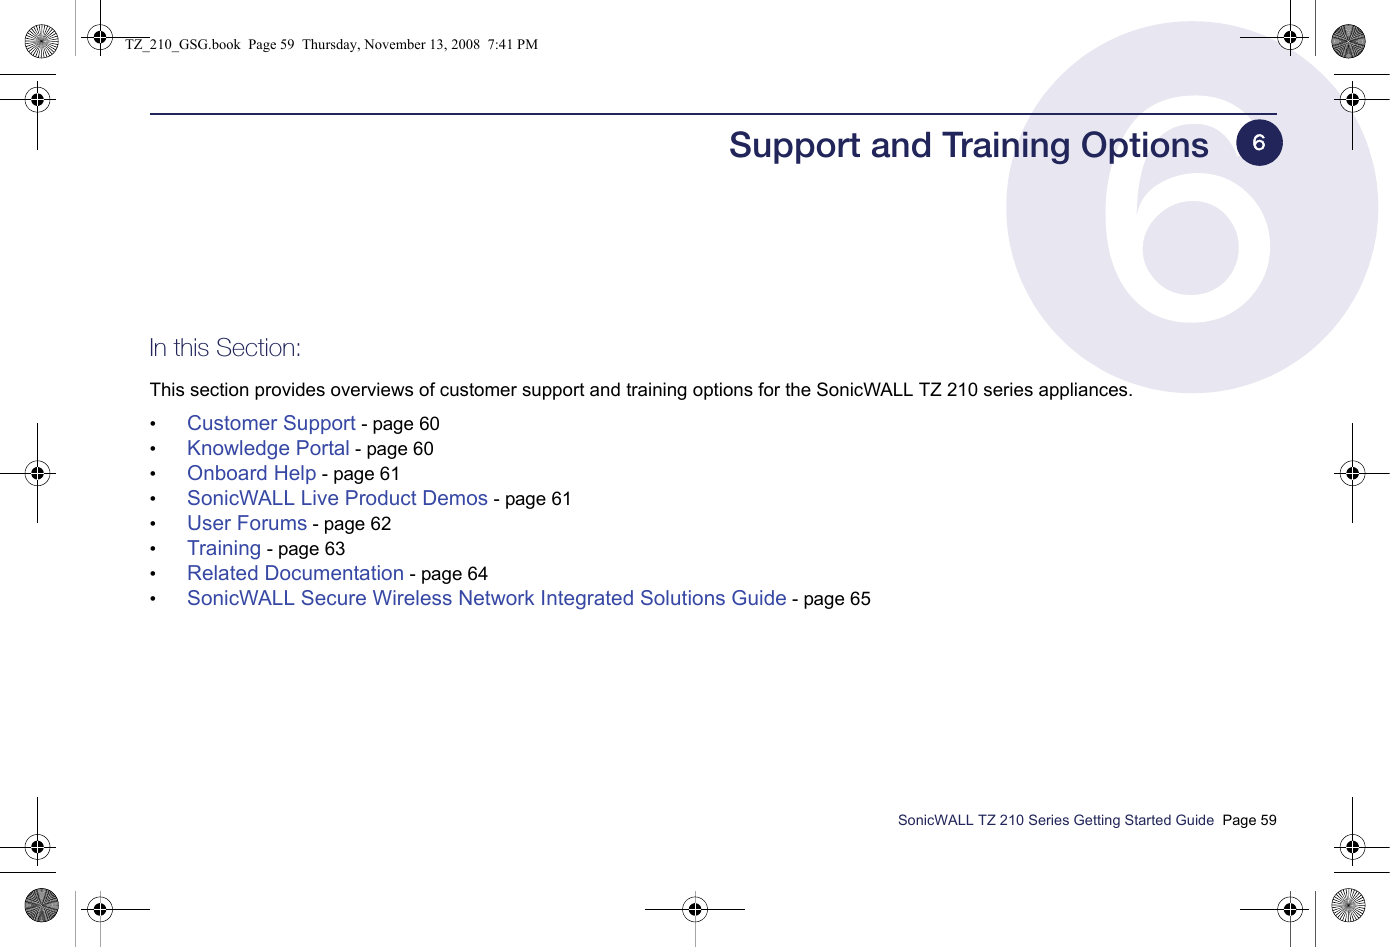 SonicWALL TZ 210 Series Getting Started Guide  Page 59Support and Training OptionsIn this Section:This section provides overviews of customer support and training options for the SonicWALL TZ 210 series appliances.•Customer Support - page 60•Knowledge Portal - page 60•Onboard Help - page 61•SonicWALL Live Product Demos - page 61•User Forums - page 62•Training - page 63•Related Documentation - page 64•SonicWALL Secure Wireless Network Integrated Solutions Guide - page 656TZ_210_GSG.book  Page 59  Thursday, November 13, 2008  7:41 PM